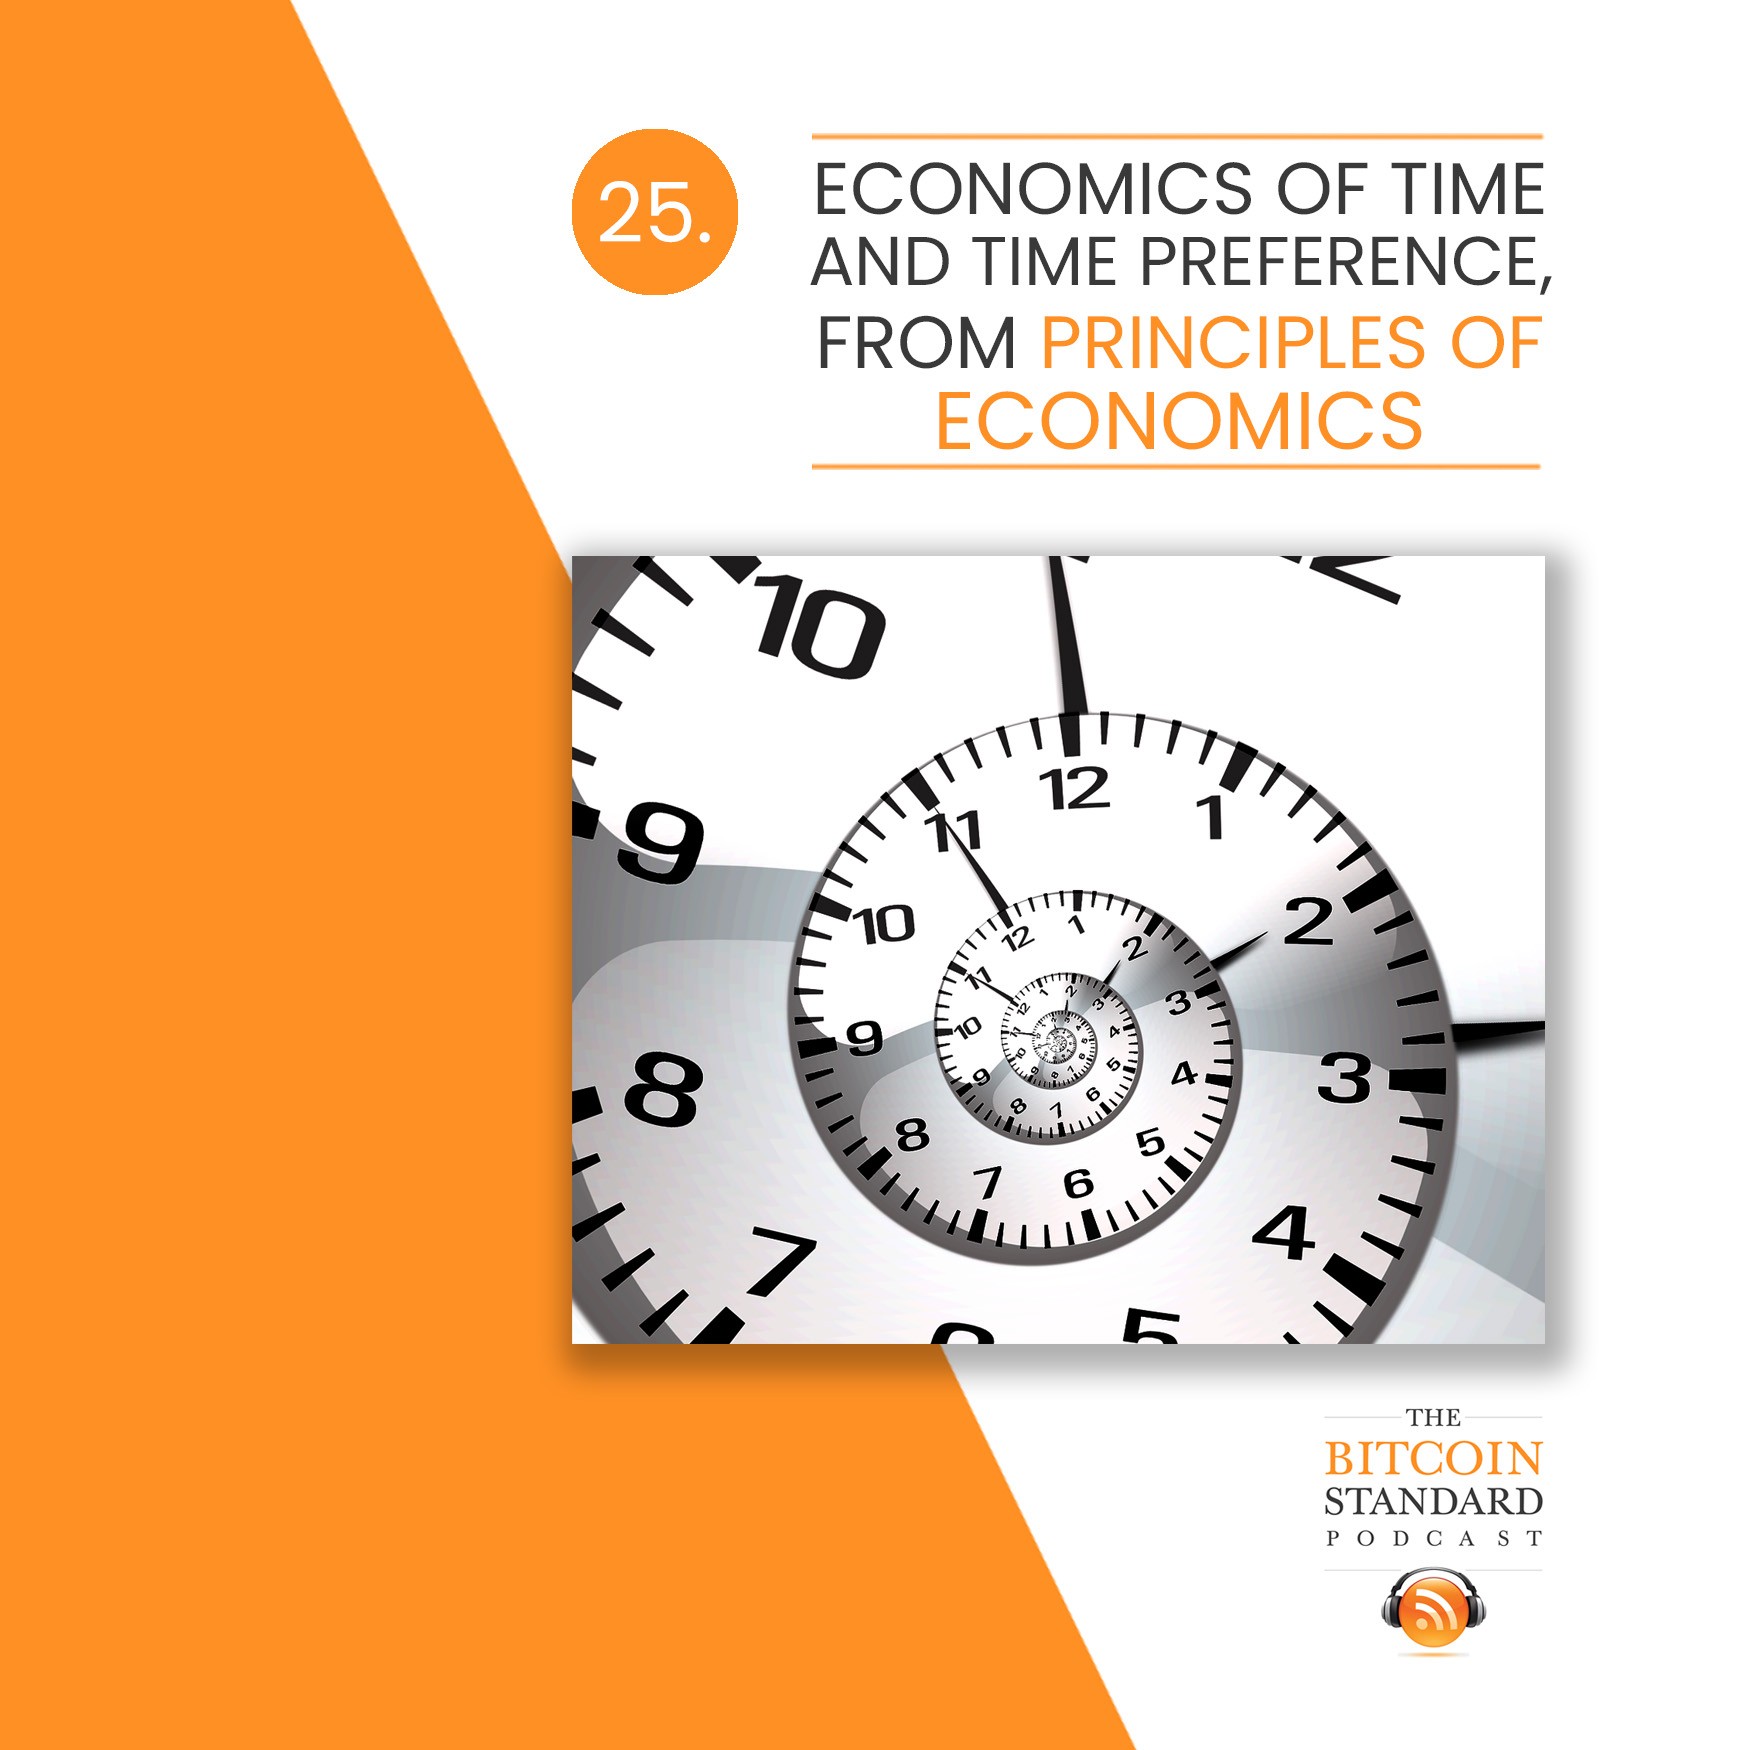 25. Economics of time and time preference, from Principles of Economics